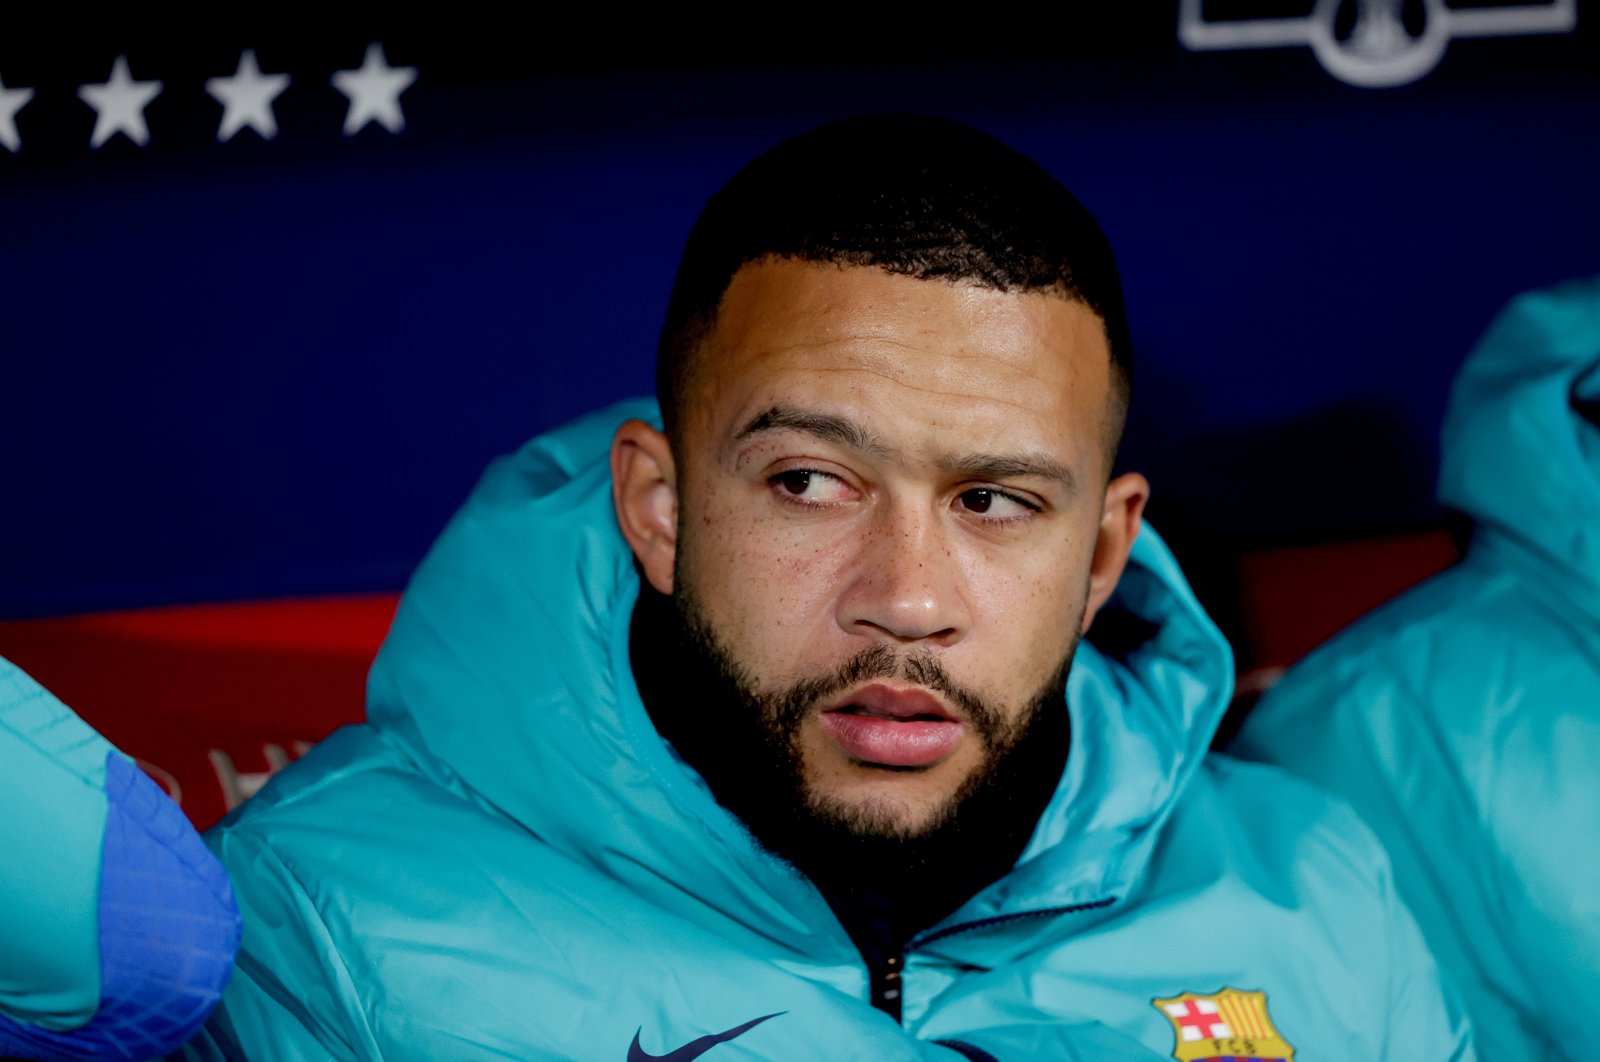 FC Barcelona&#039;s Memphis Depay looks disappointed during the La Liga match against Atletico Madrid at the Wanda Metropolitano, Madrid, Spain, Jan. 8, 2023. (Getty Images Photo)